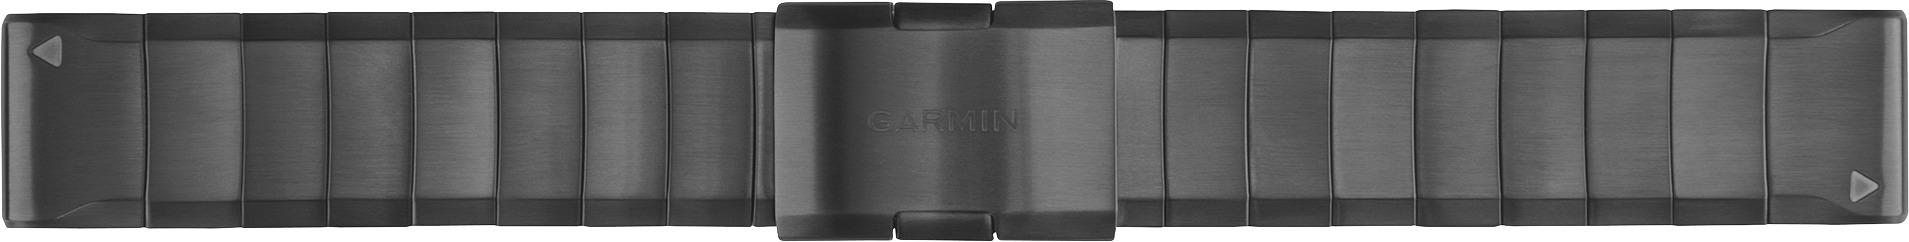 Angle View: QuickFit Wristband for Garmin fēnix 5 and Garmin Forerunner 935 GPS Watches - Slate Gray